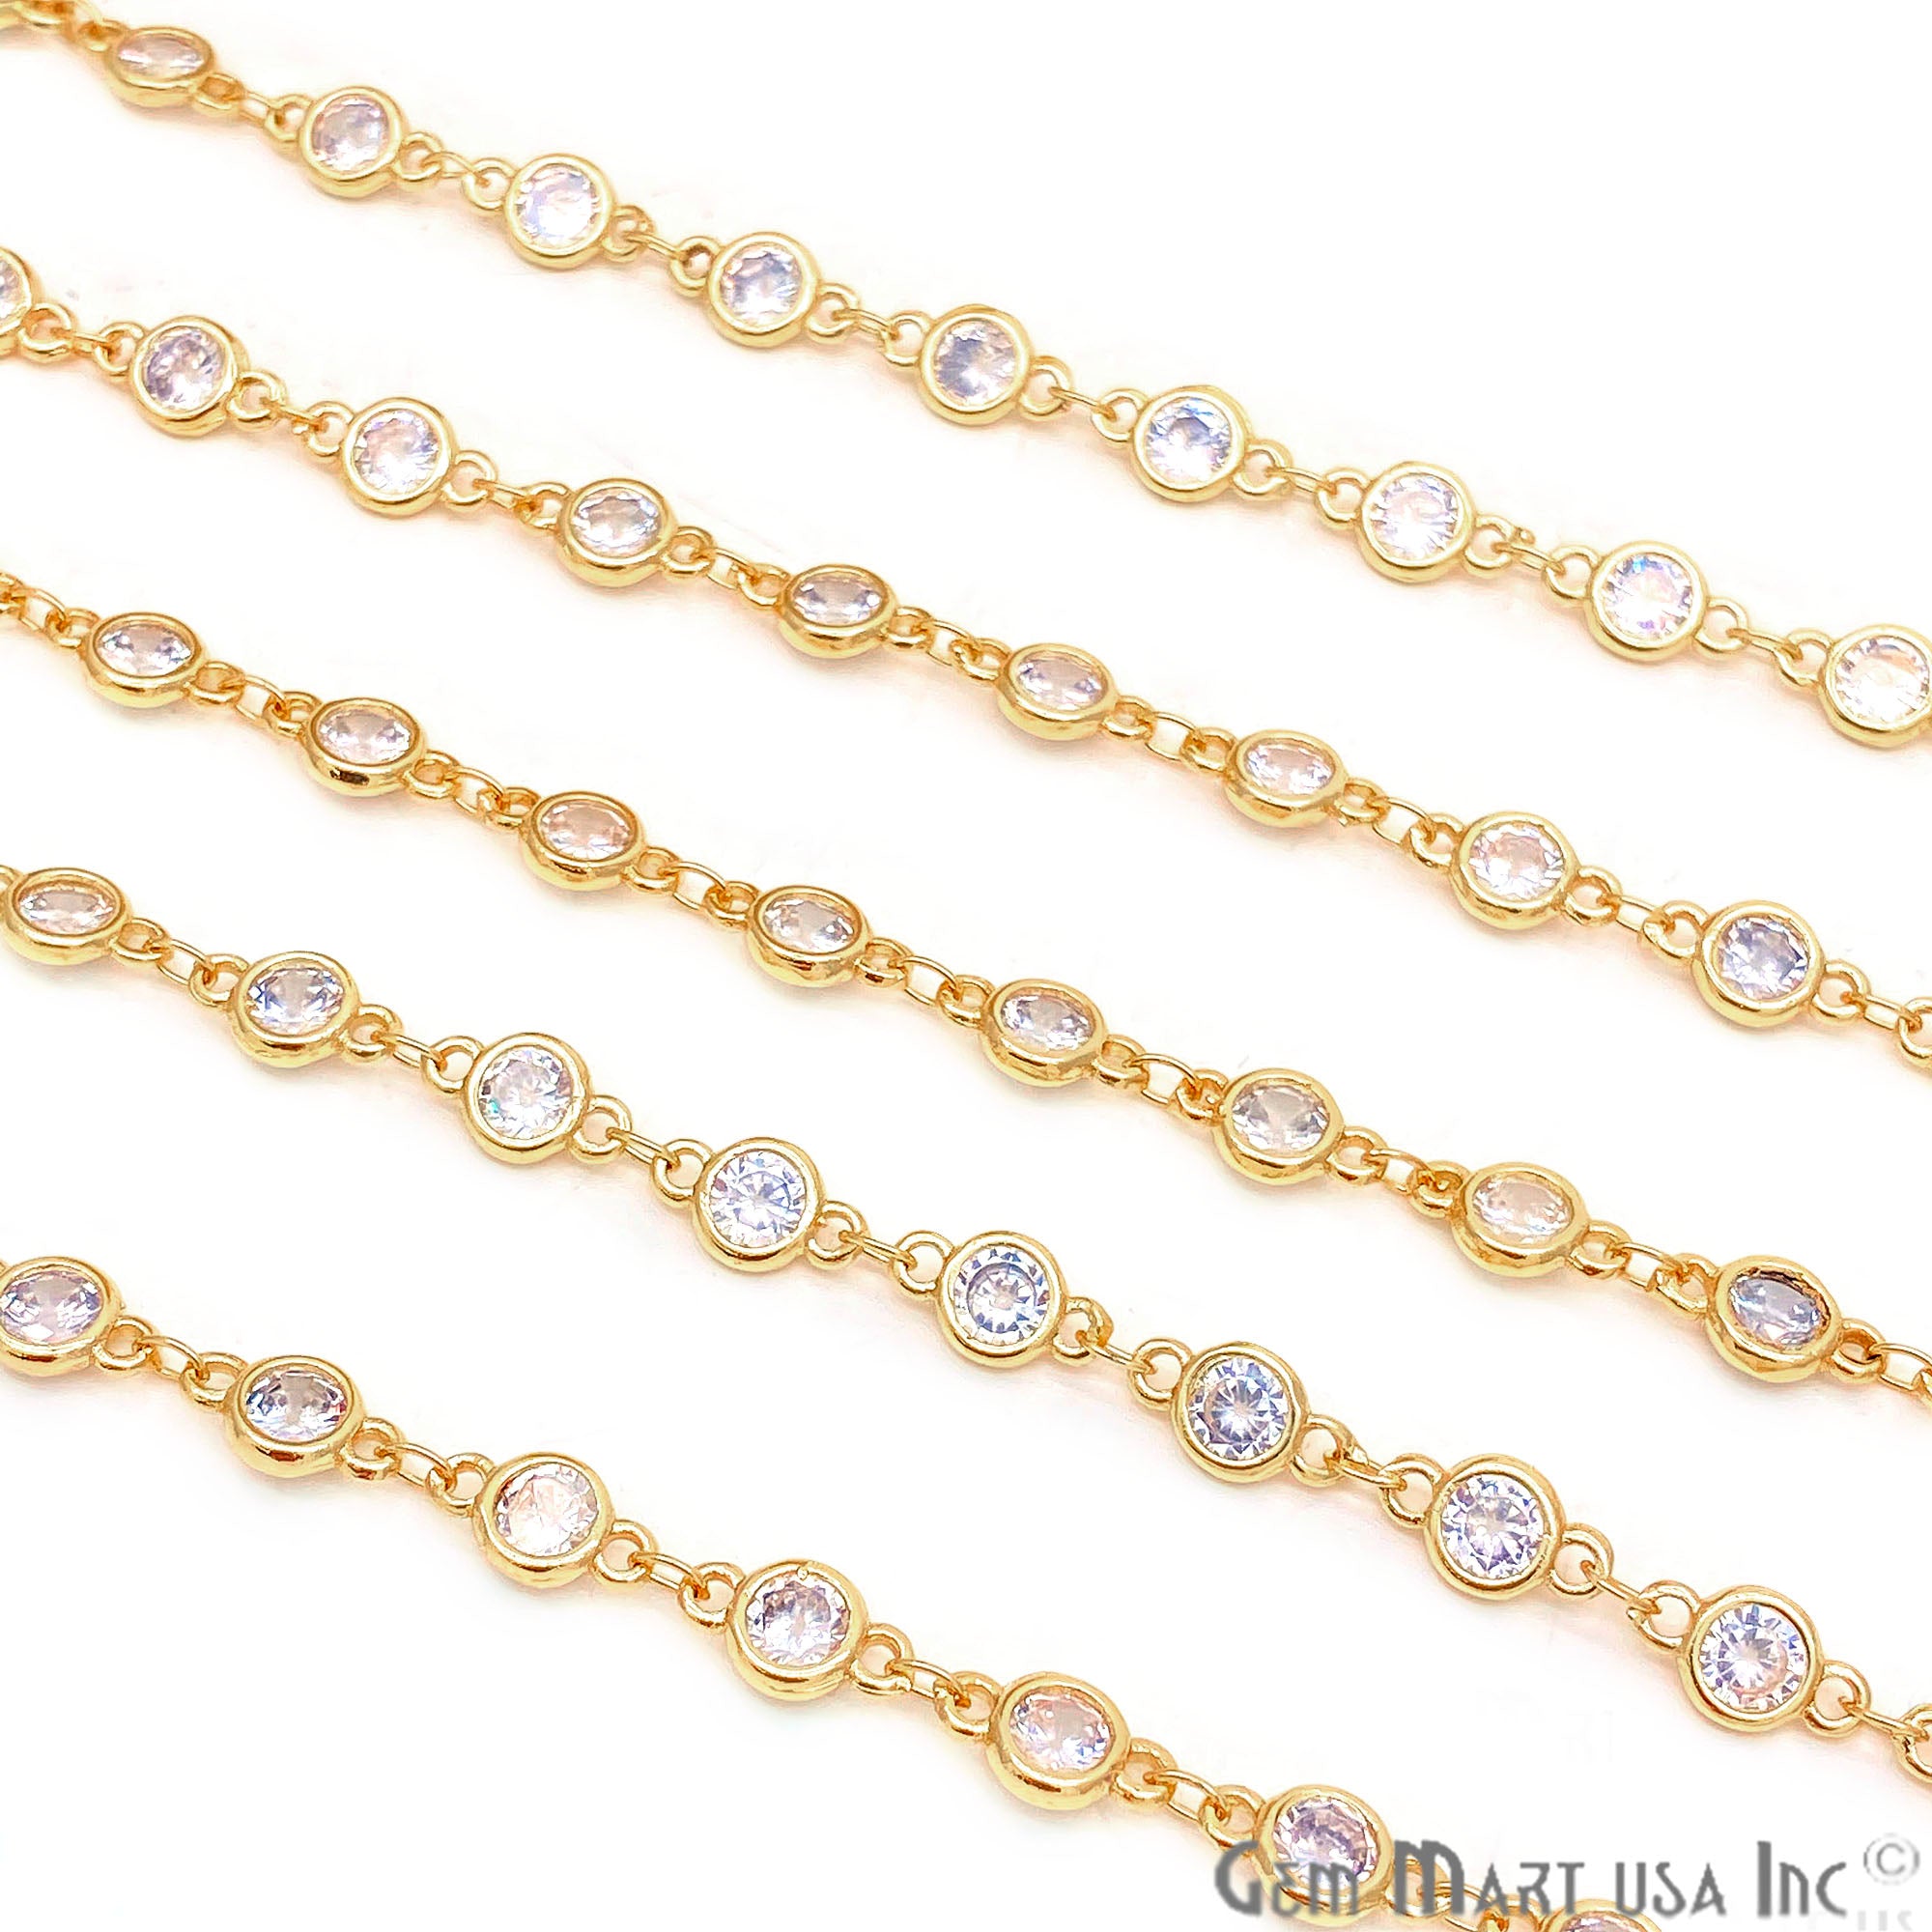 White Zircon Round Shape 5.5mm Gold Plated Continuous Connector Chain - GemMartUSA